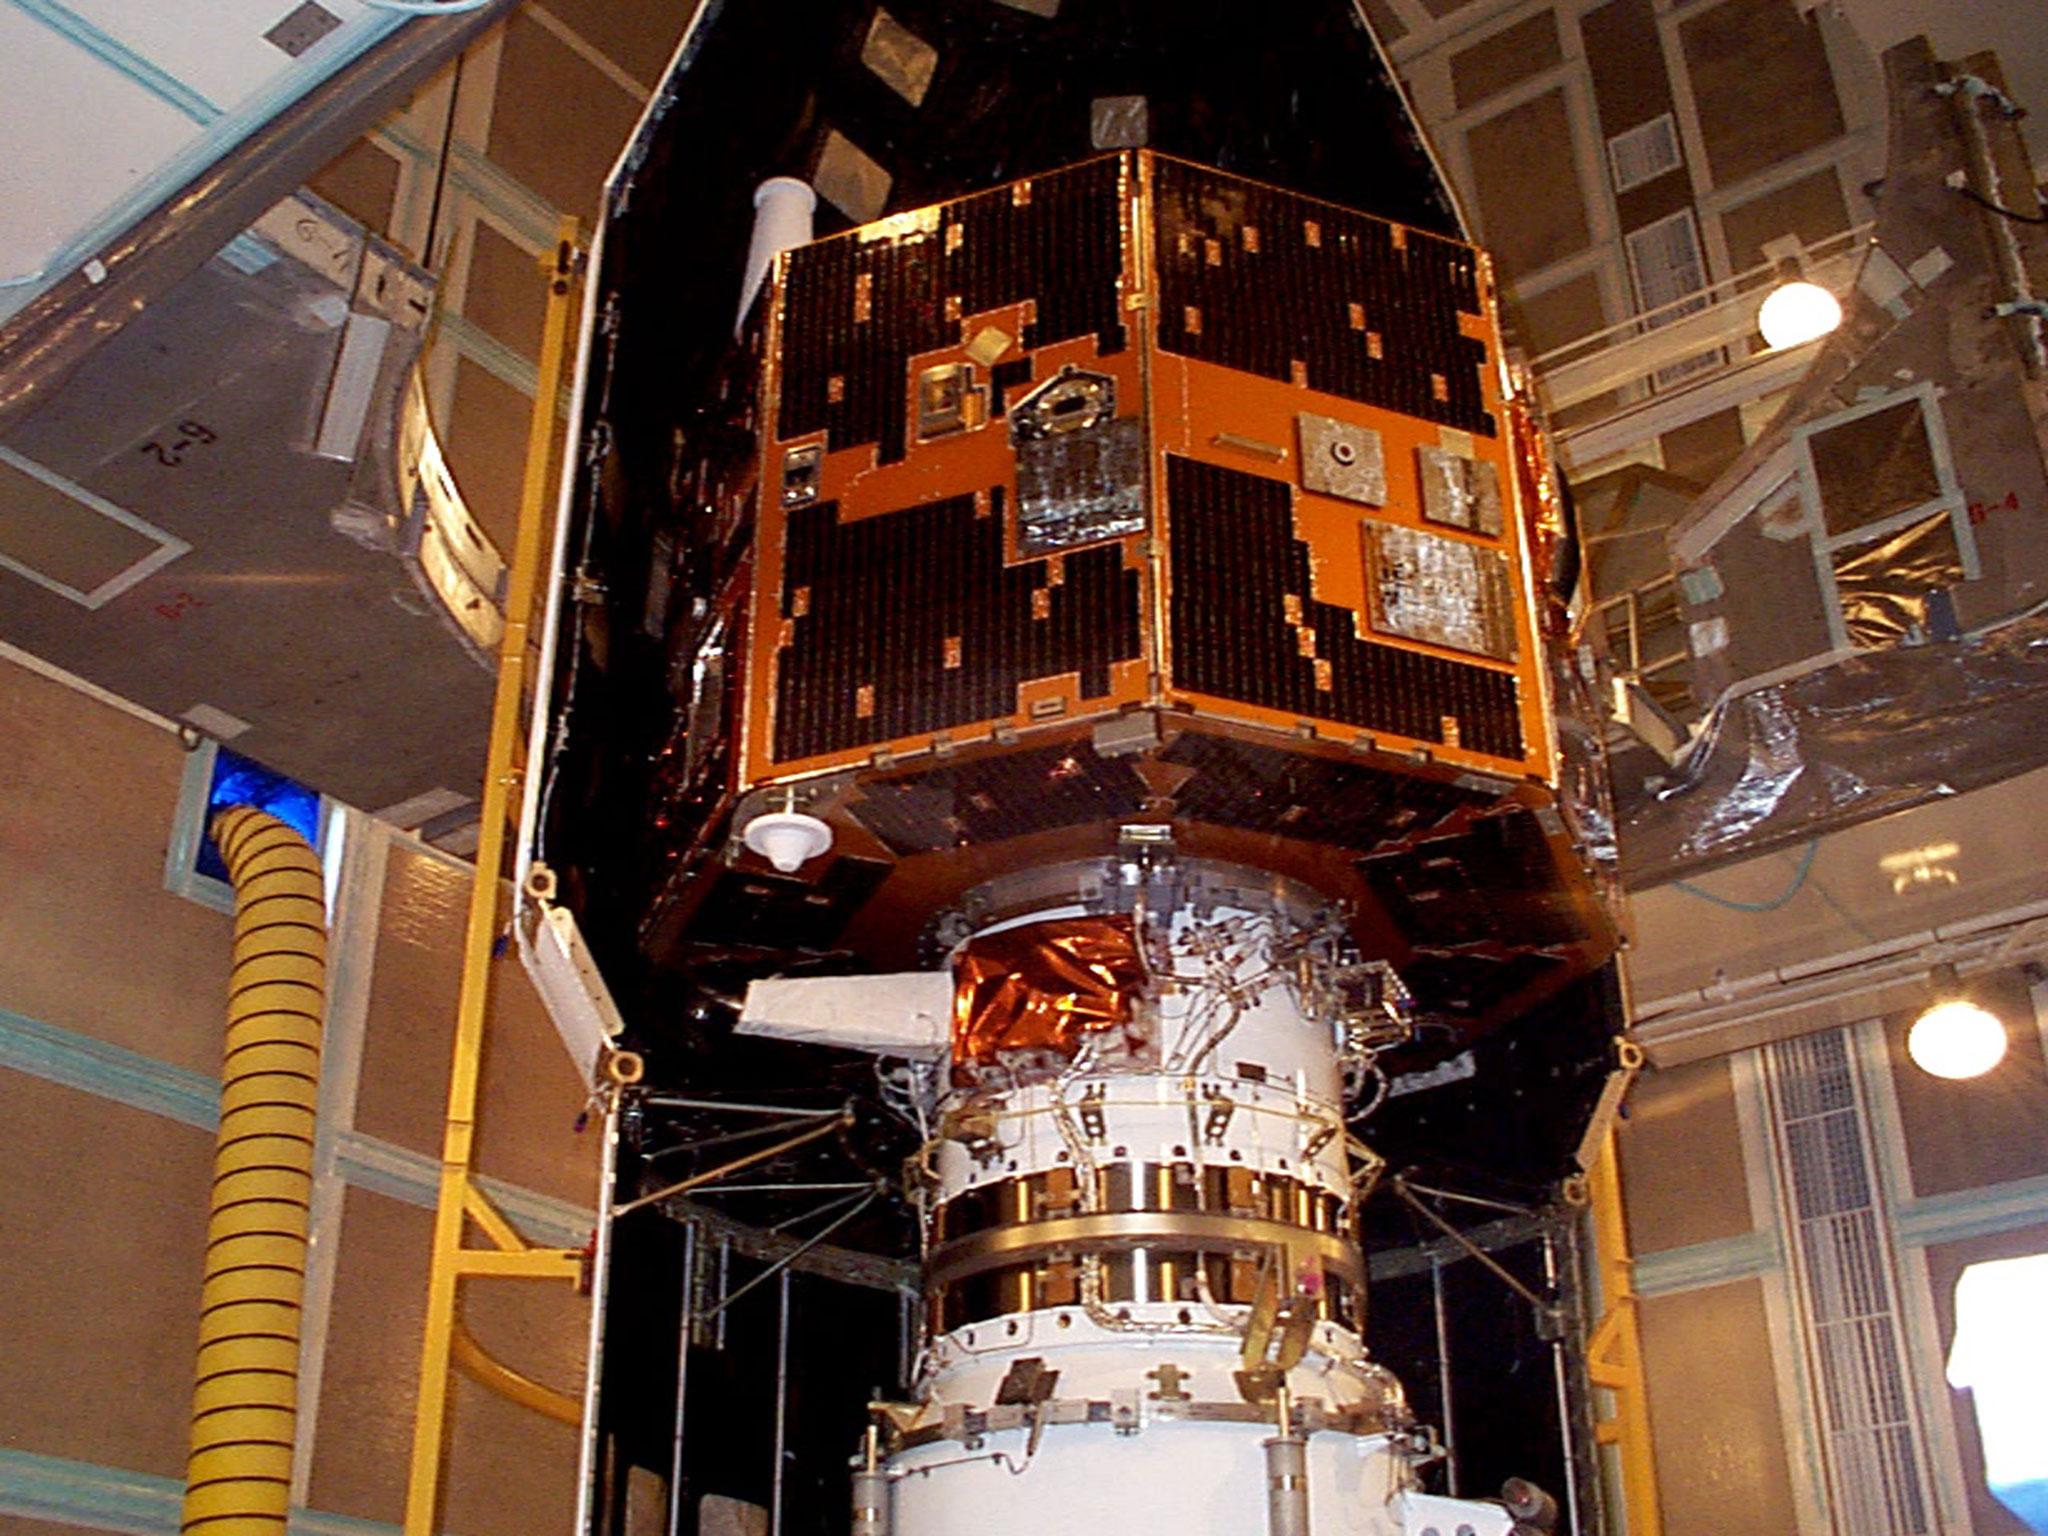 ‘Image’ was launched in 2000 to investigate Earth’s magnetic shield